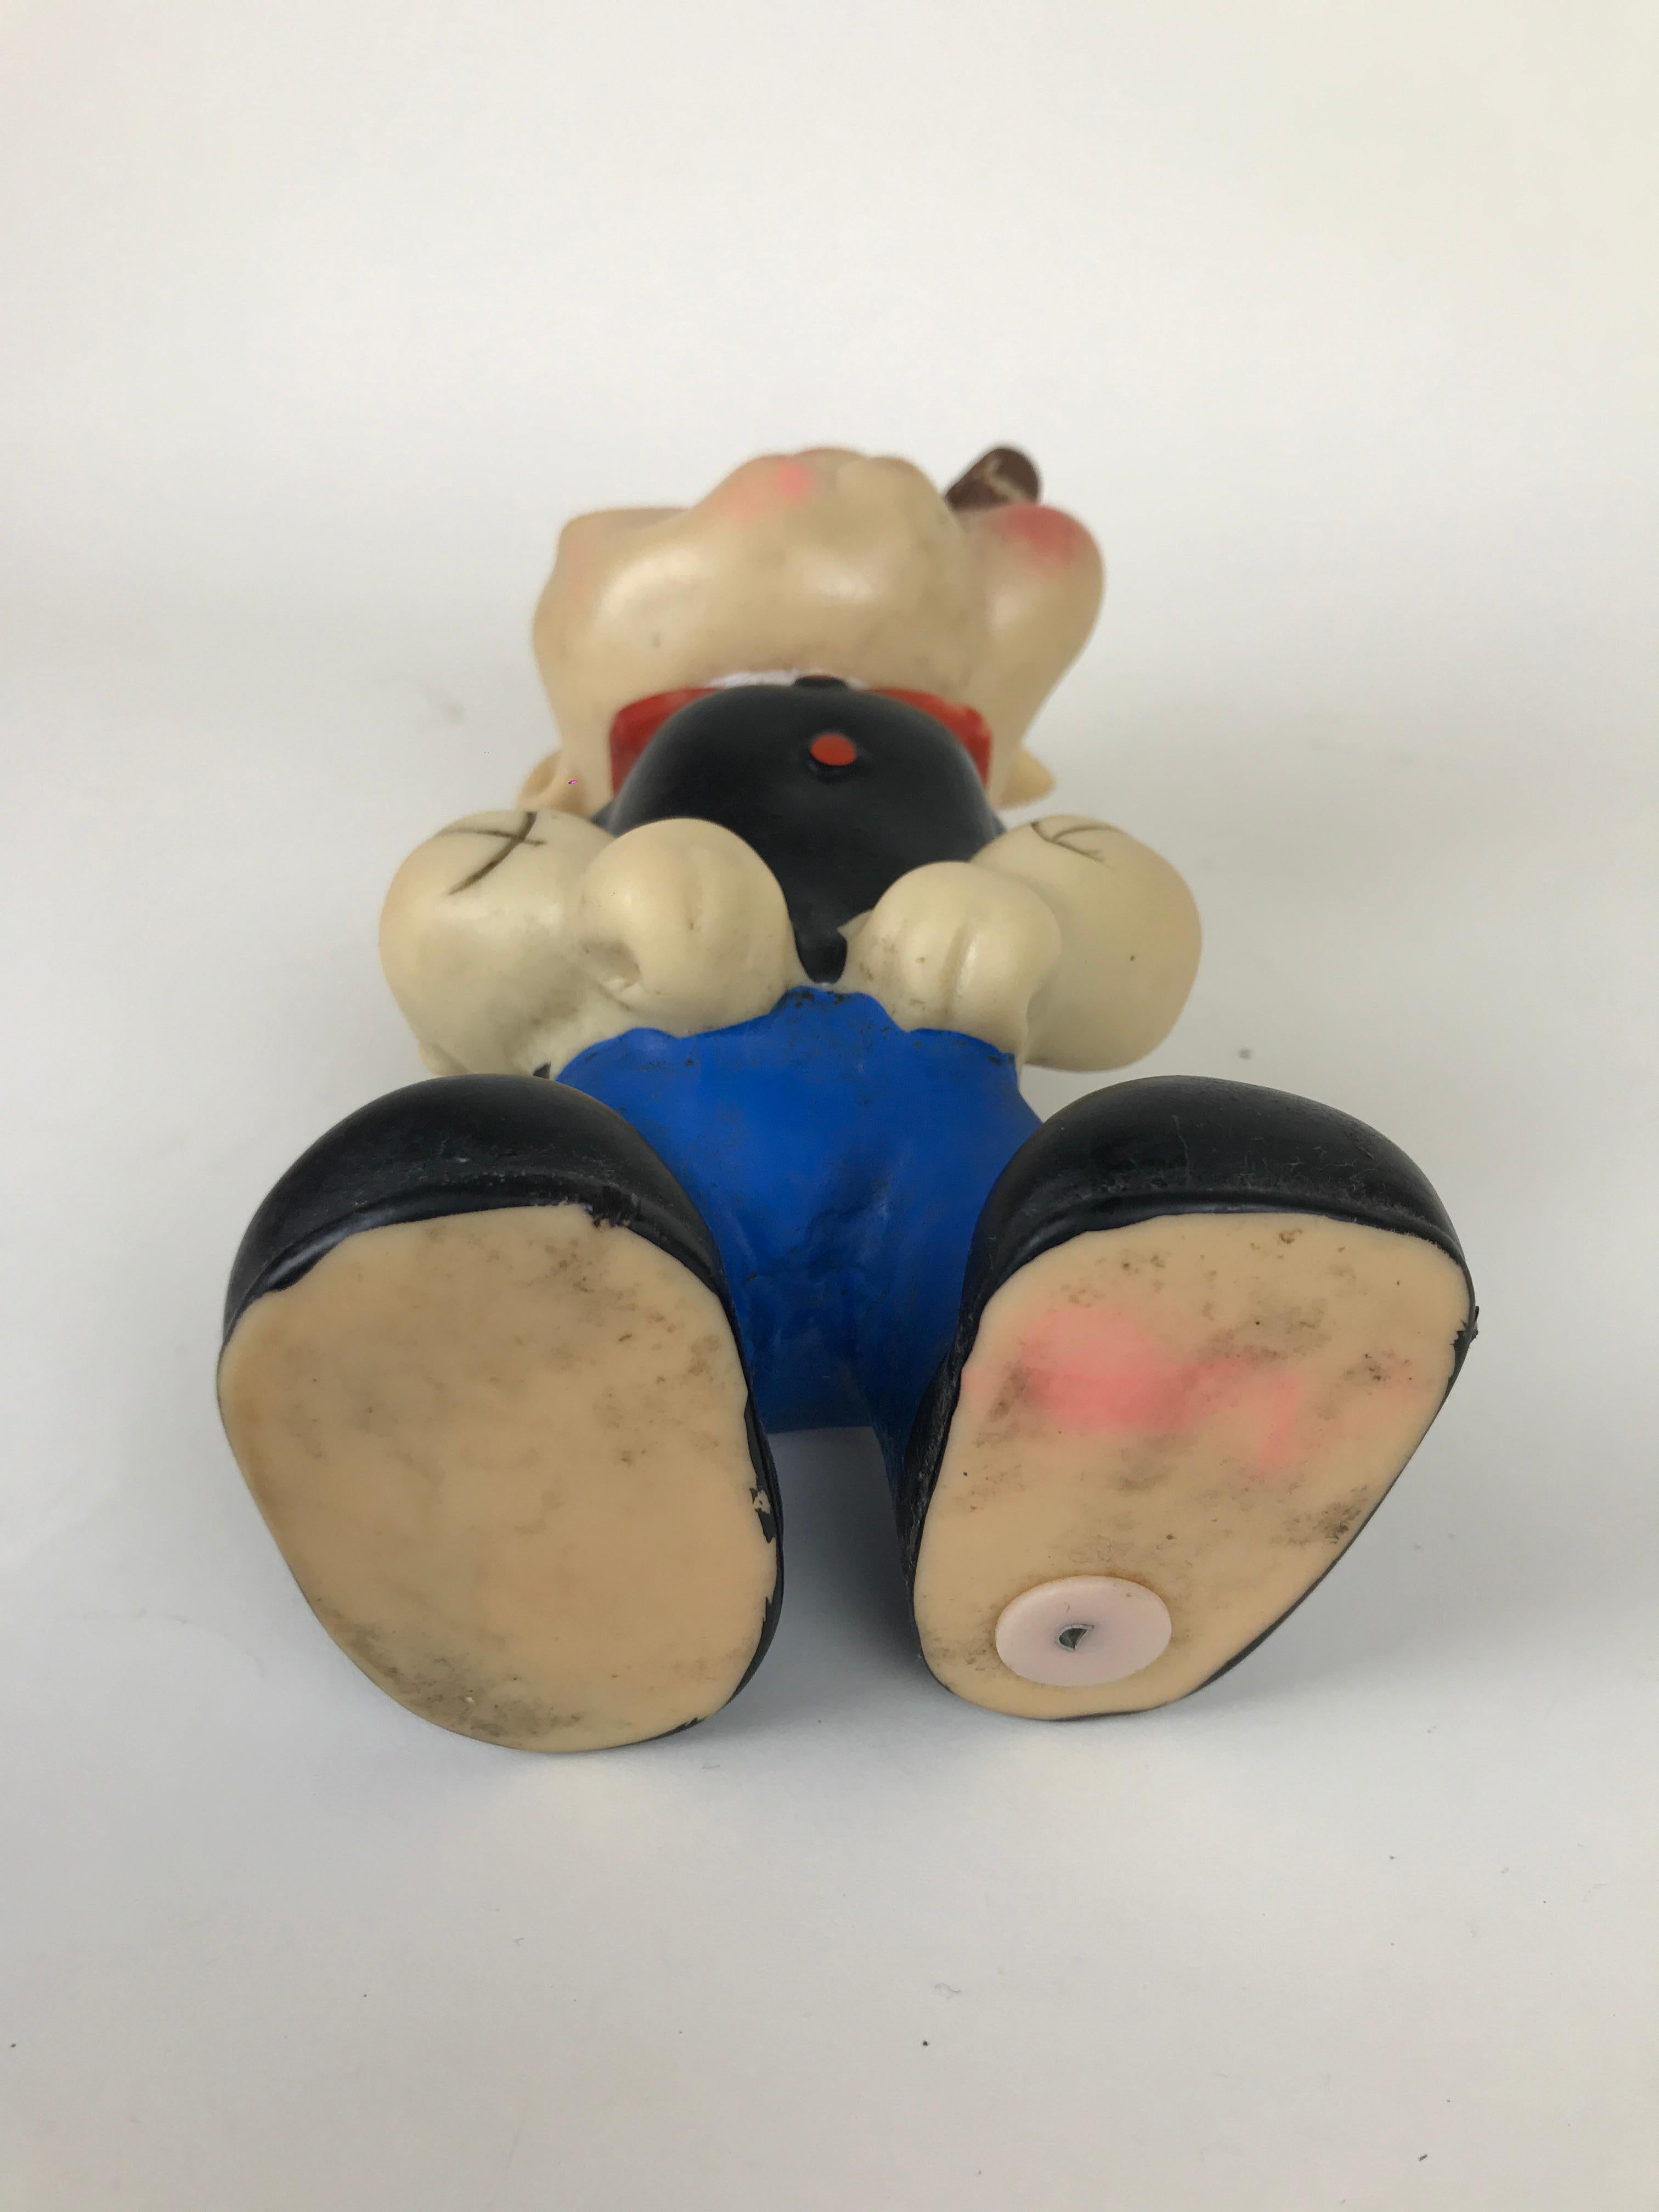 1960s Vintage Italian Popeye the Sailor Rubber Squeak Toy Made by Italo Cremona For Sale 1